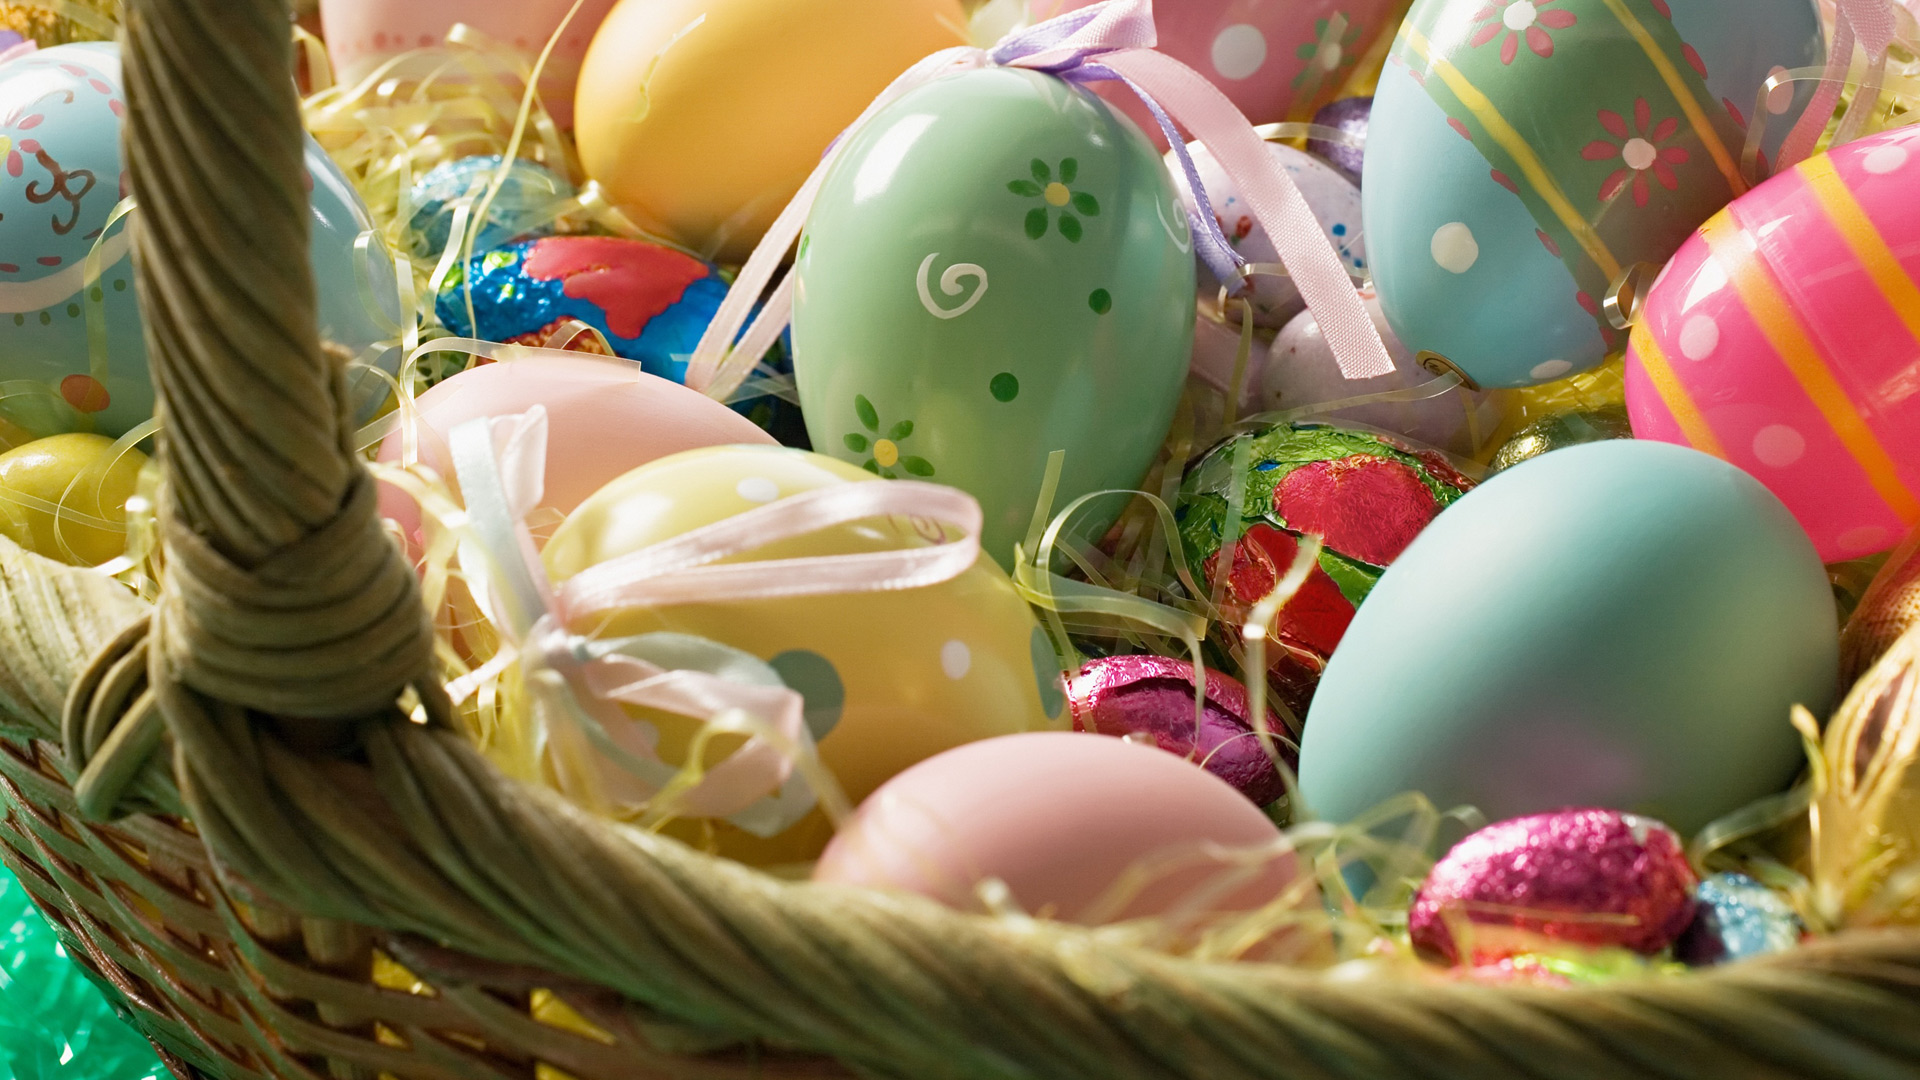 Easter 2014 HD Wallpapers - Wallpaper, High Definition, High Quality